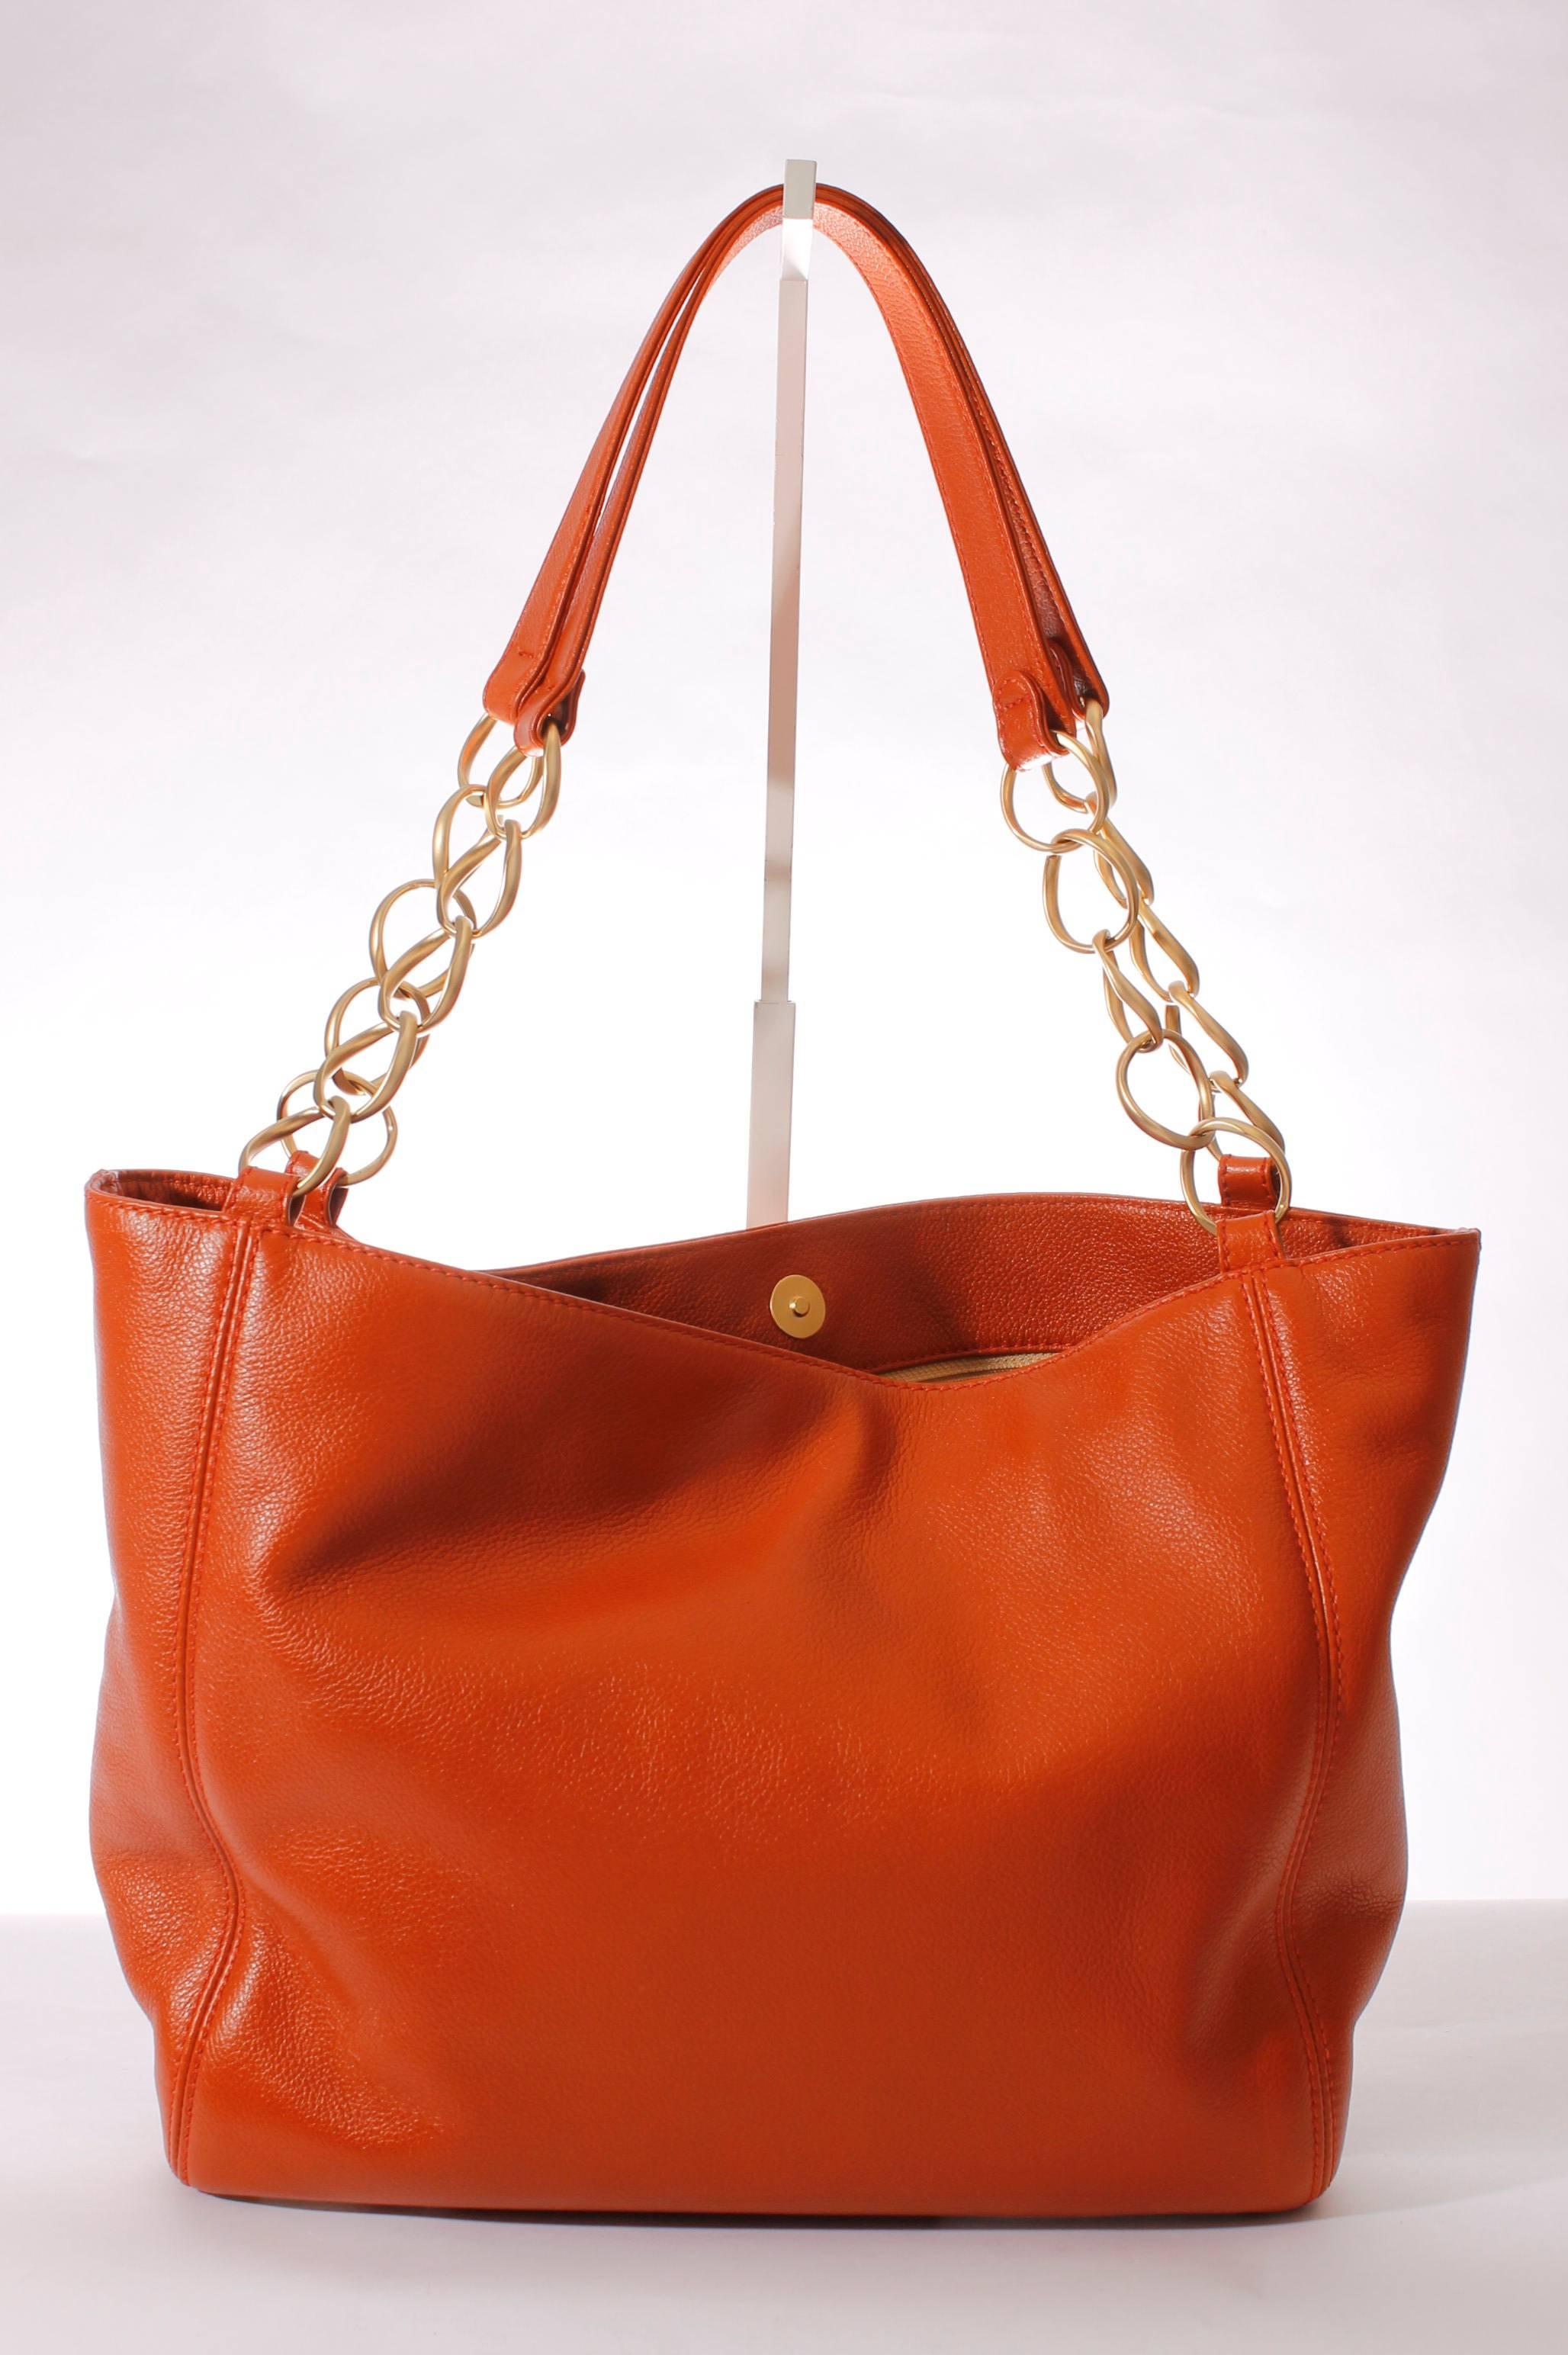 
Chanel at her best; a beautiful orange shopper!

This one is in impeccable state and has a perfect size; 35 cm wide, 26 cm high and 13 cm deep. The handles have a length of 64 centimeters, that's just right to wear on your shoulder. The hardware